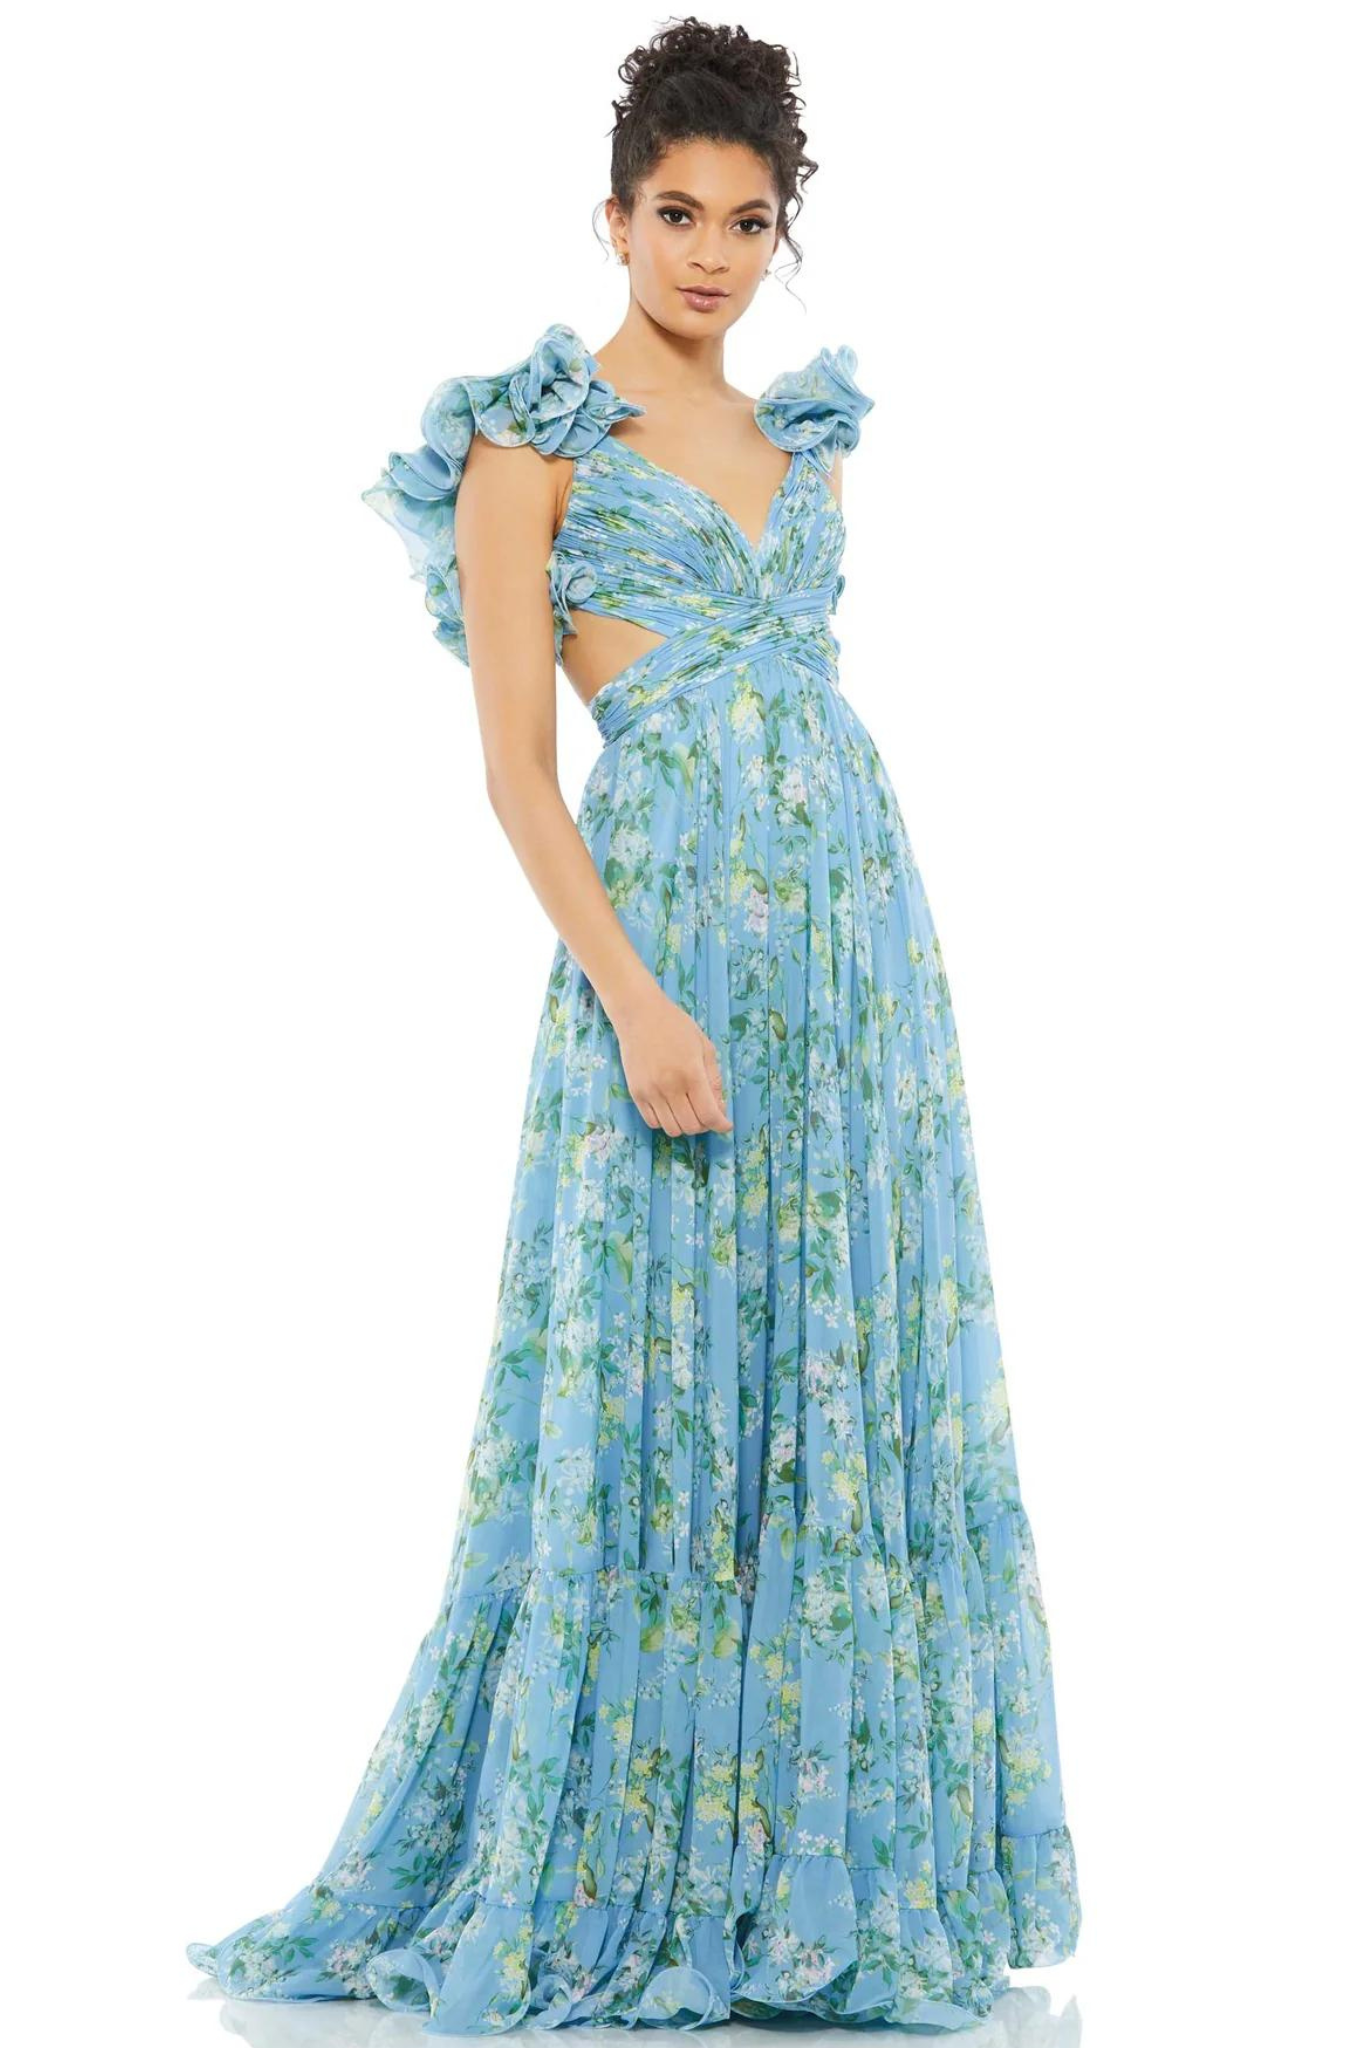 Barcelona Gown in Soft Blue Floral by Mac Duggal - RENTAL